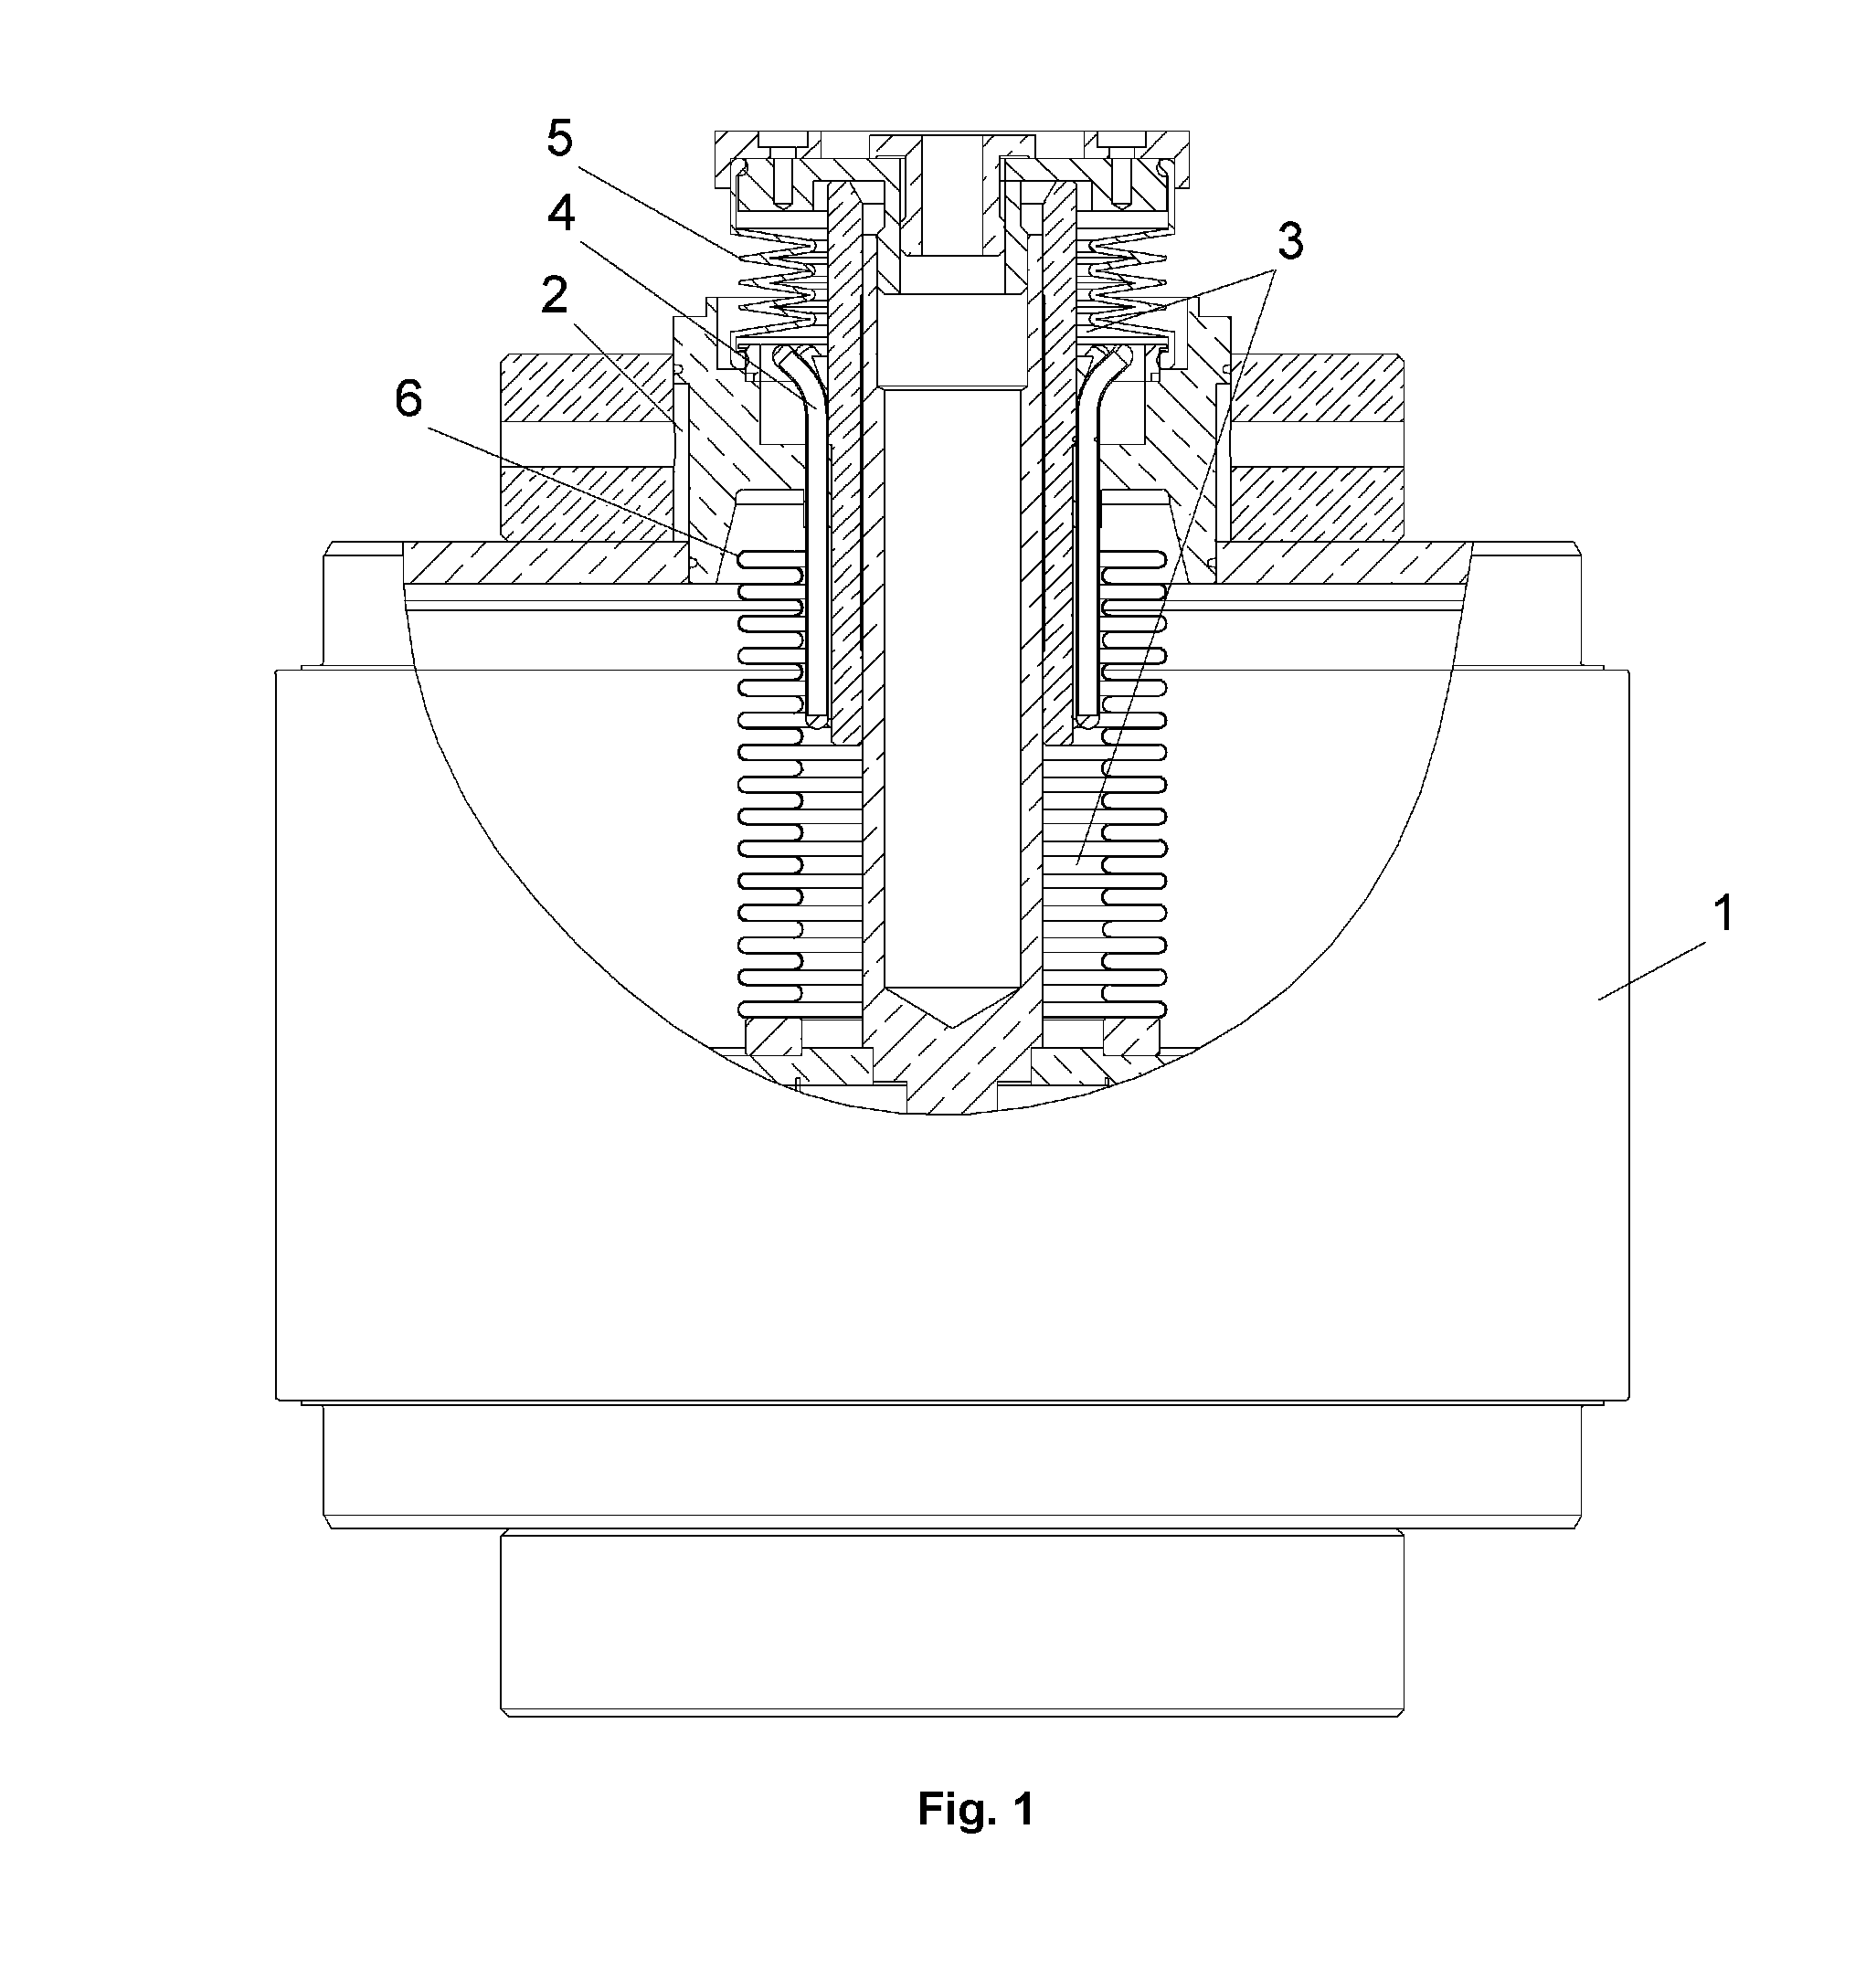 Cooling system for a variable vacuum capacitor